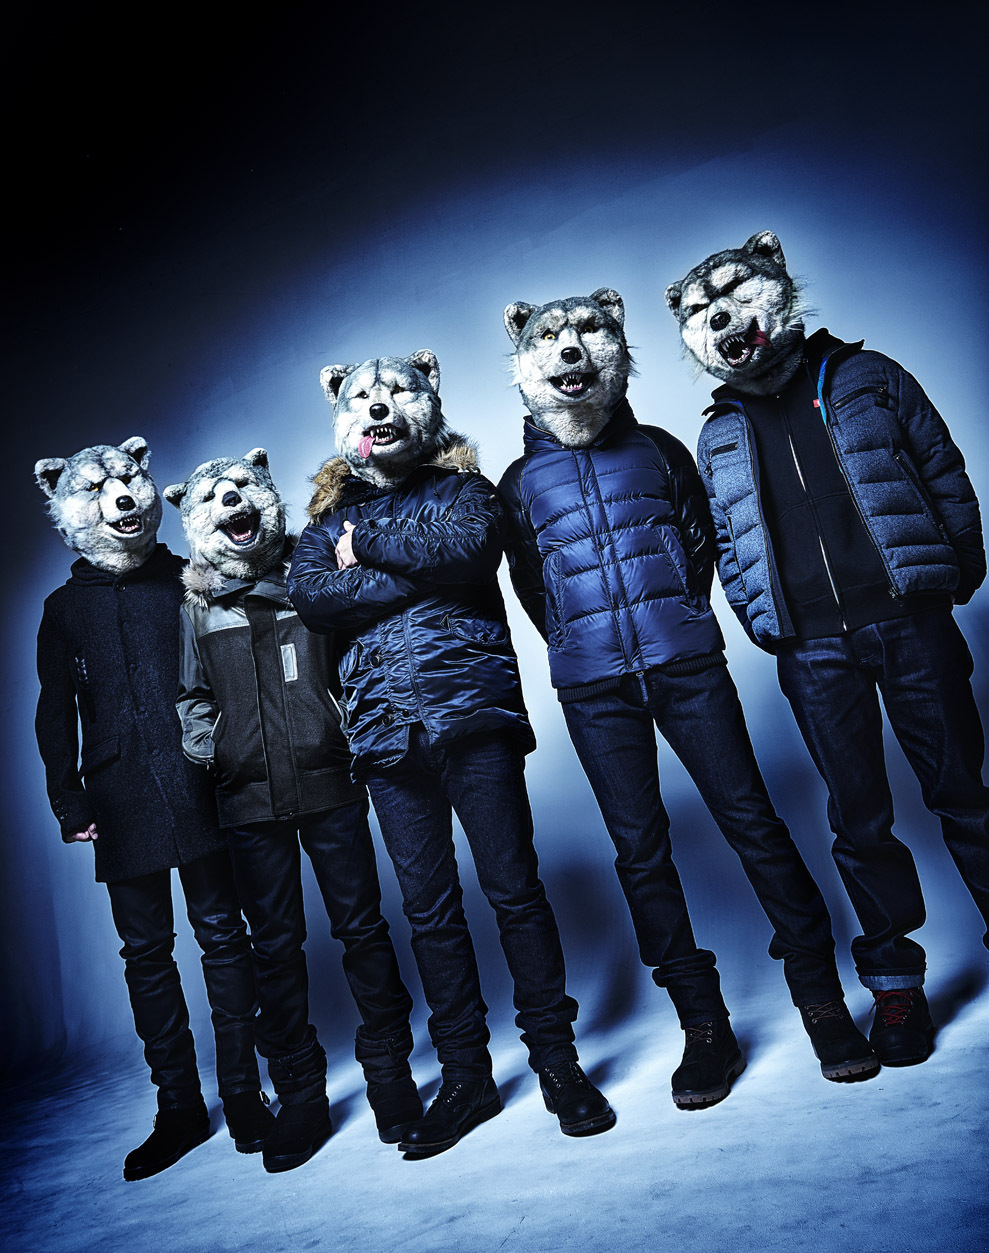 Man With A Mission 壁紙 9159 Man With A Mission 壁紙 高画質